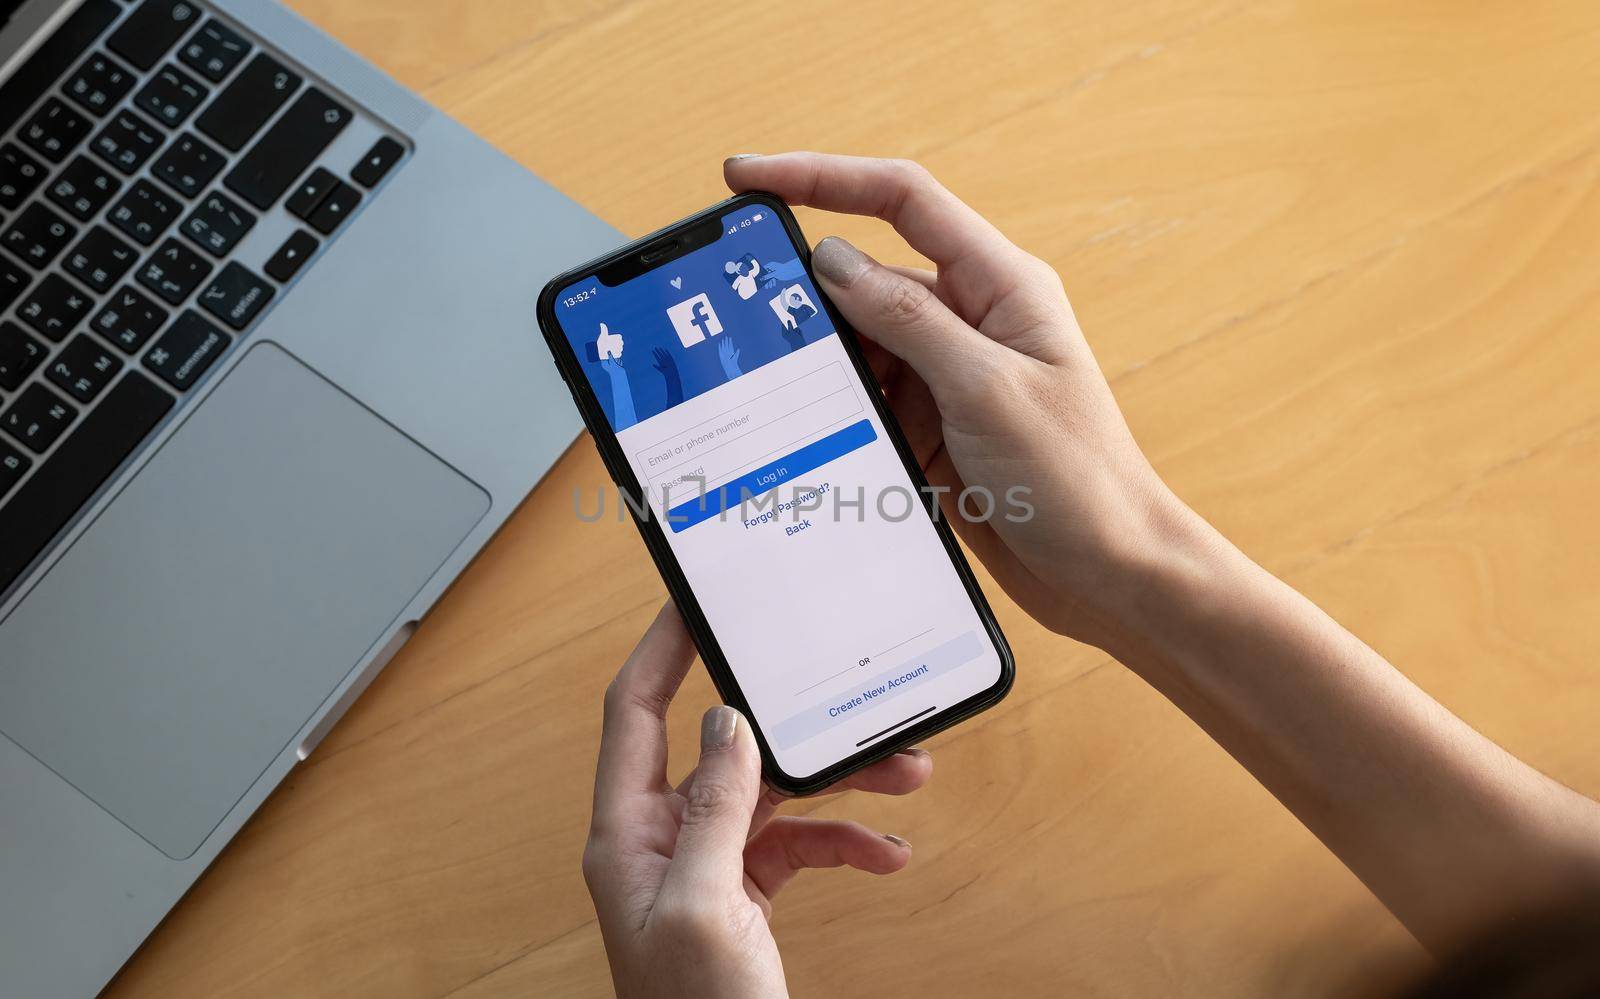 CHIANG MAI, THAILAND - OCT 03, 2018: Facebook social media app logo on log-in, sign-up registration page on mobile app screen on iPhone X in person's hand working on e-commerce shopping business